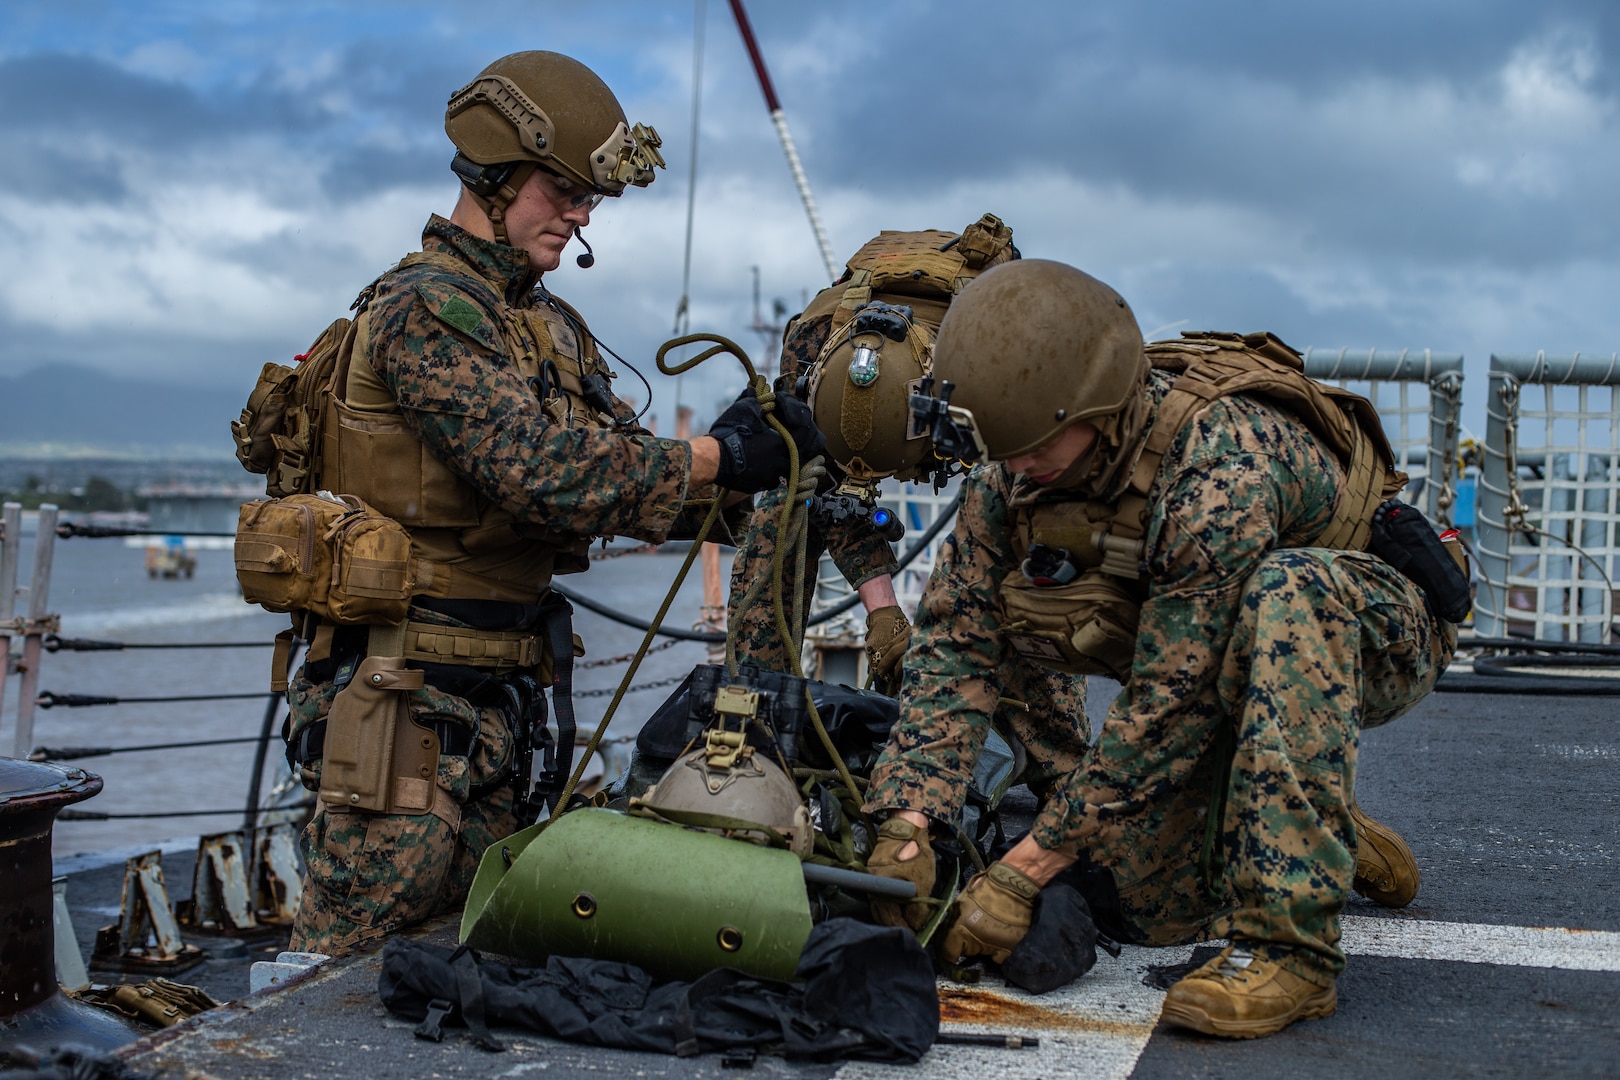 31st Marine Expeditionary Unit Maritime Raid Force begins Training Exercise in Hawaii